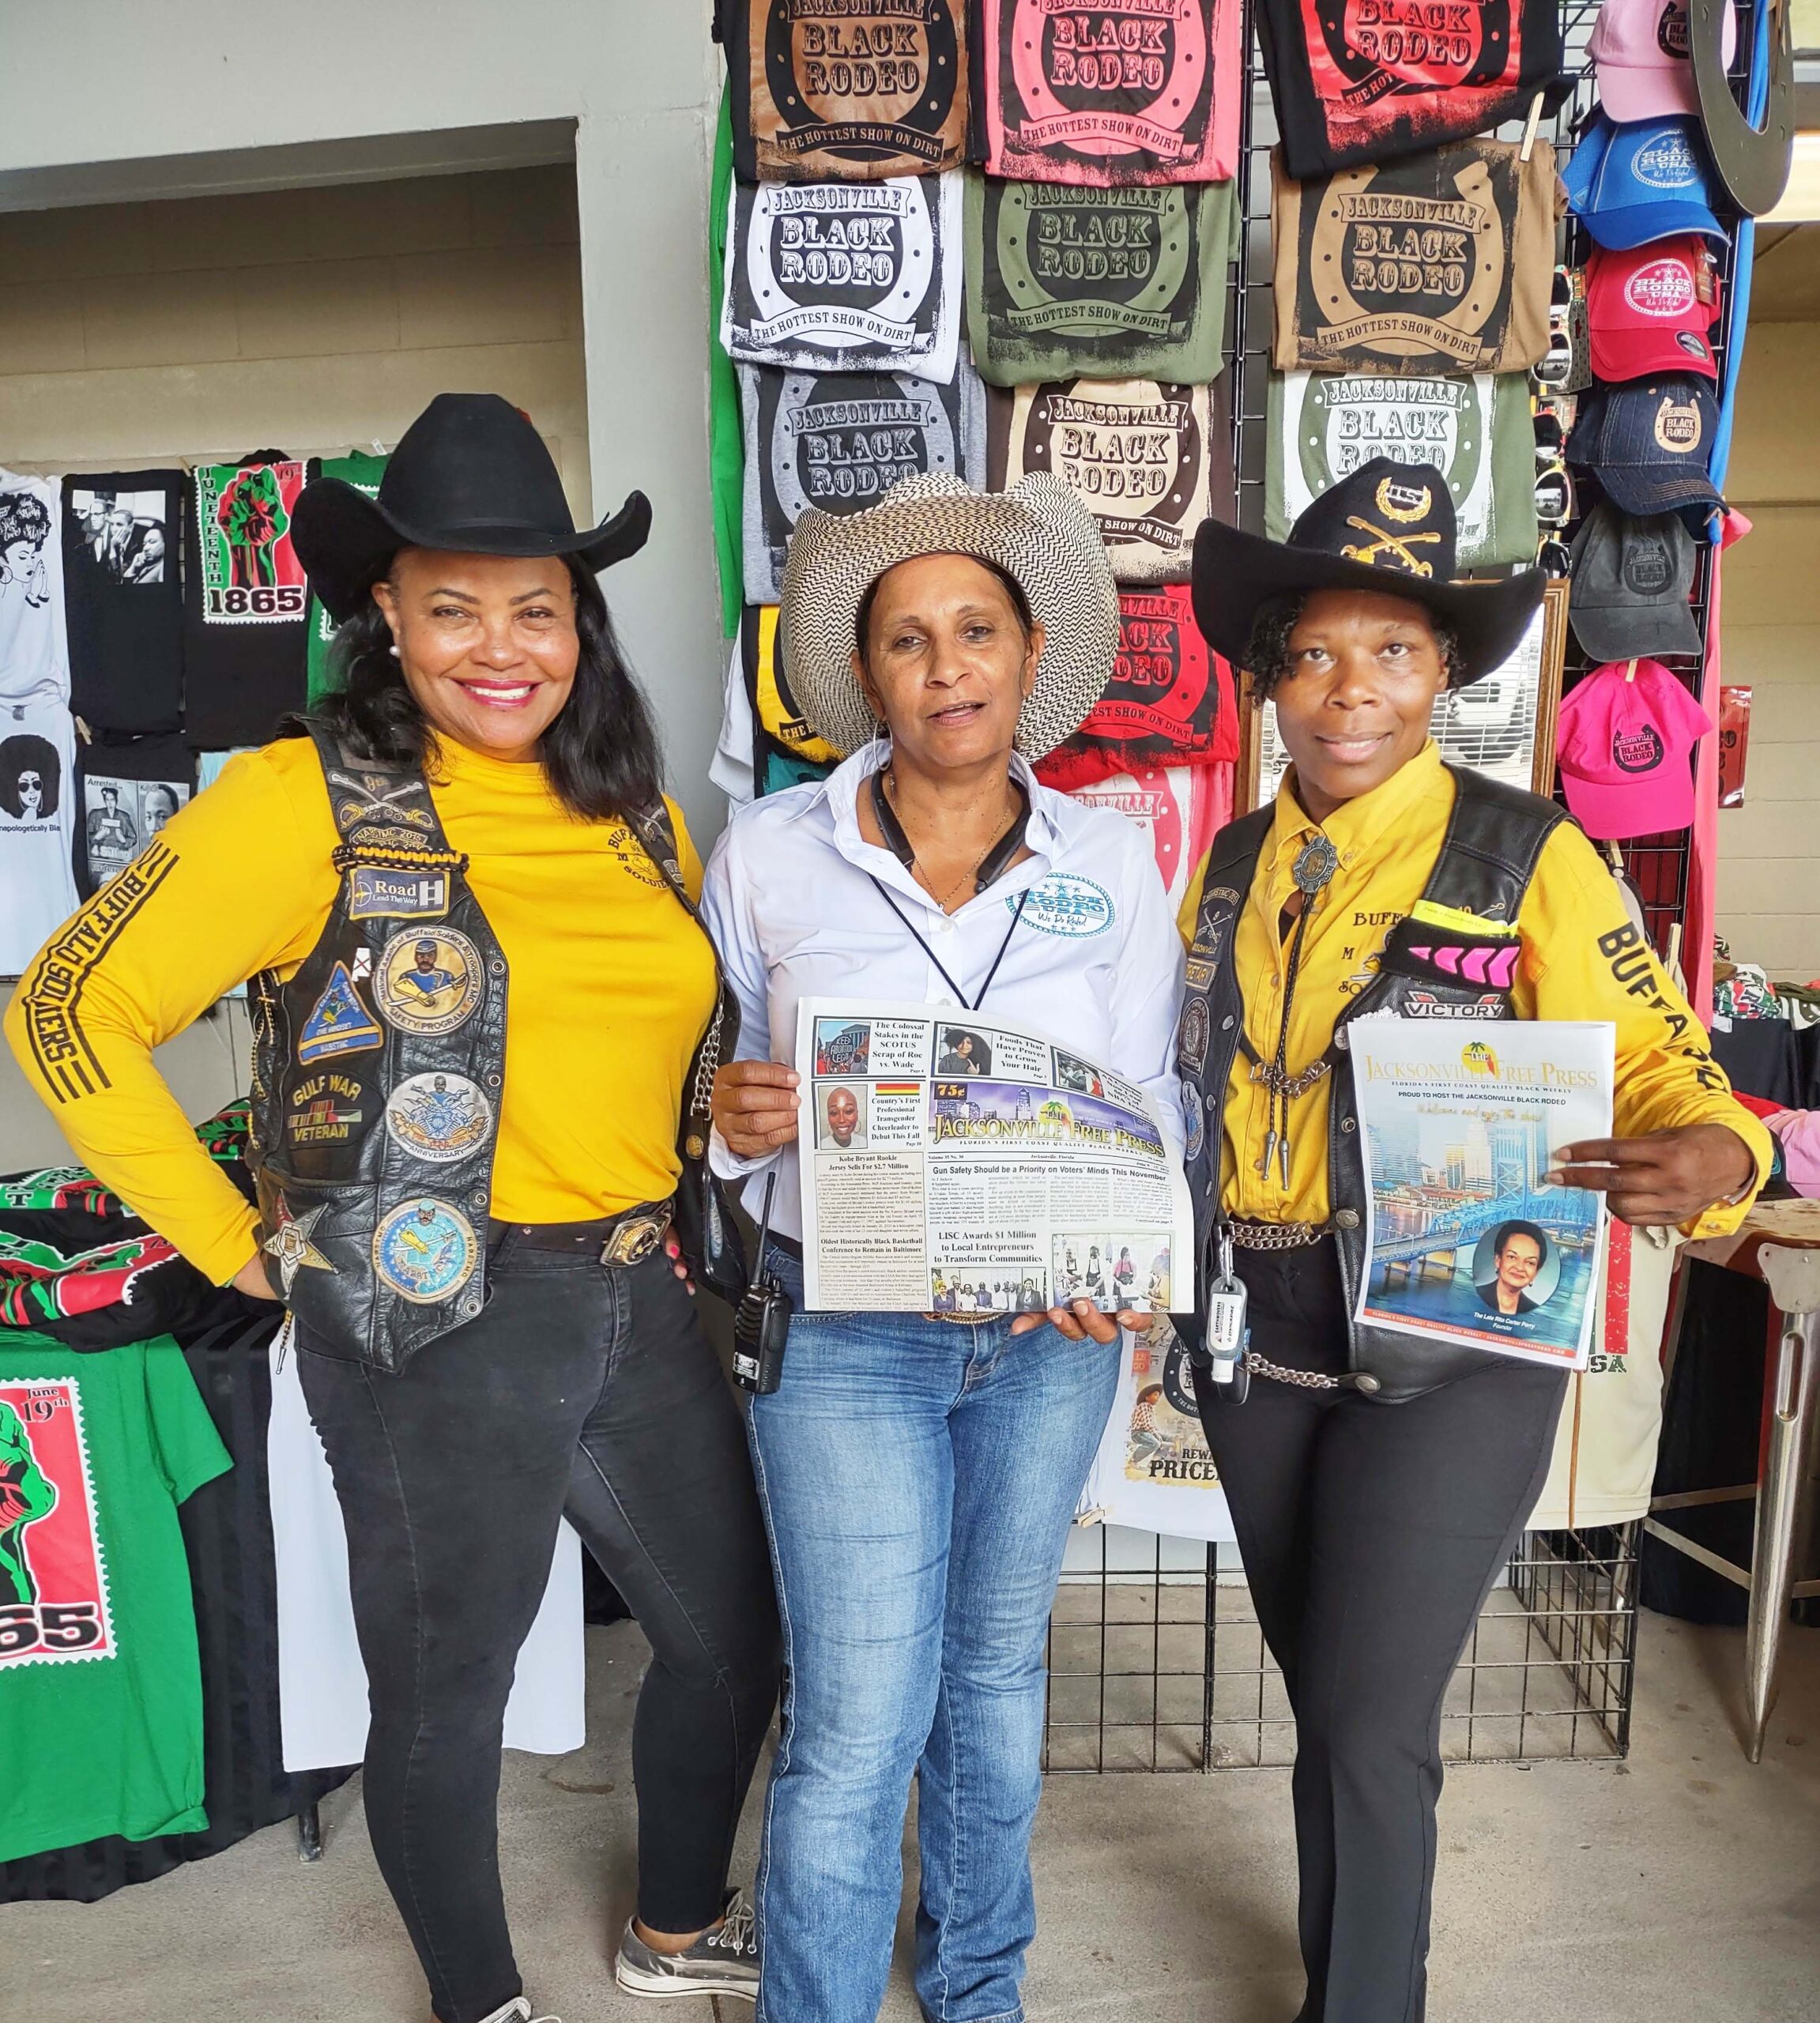 Jaxons Experience Sportsmanship and History at the Black Rodeo Free